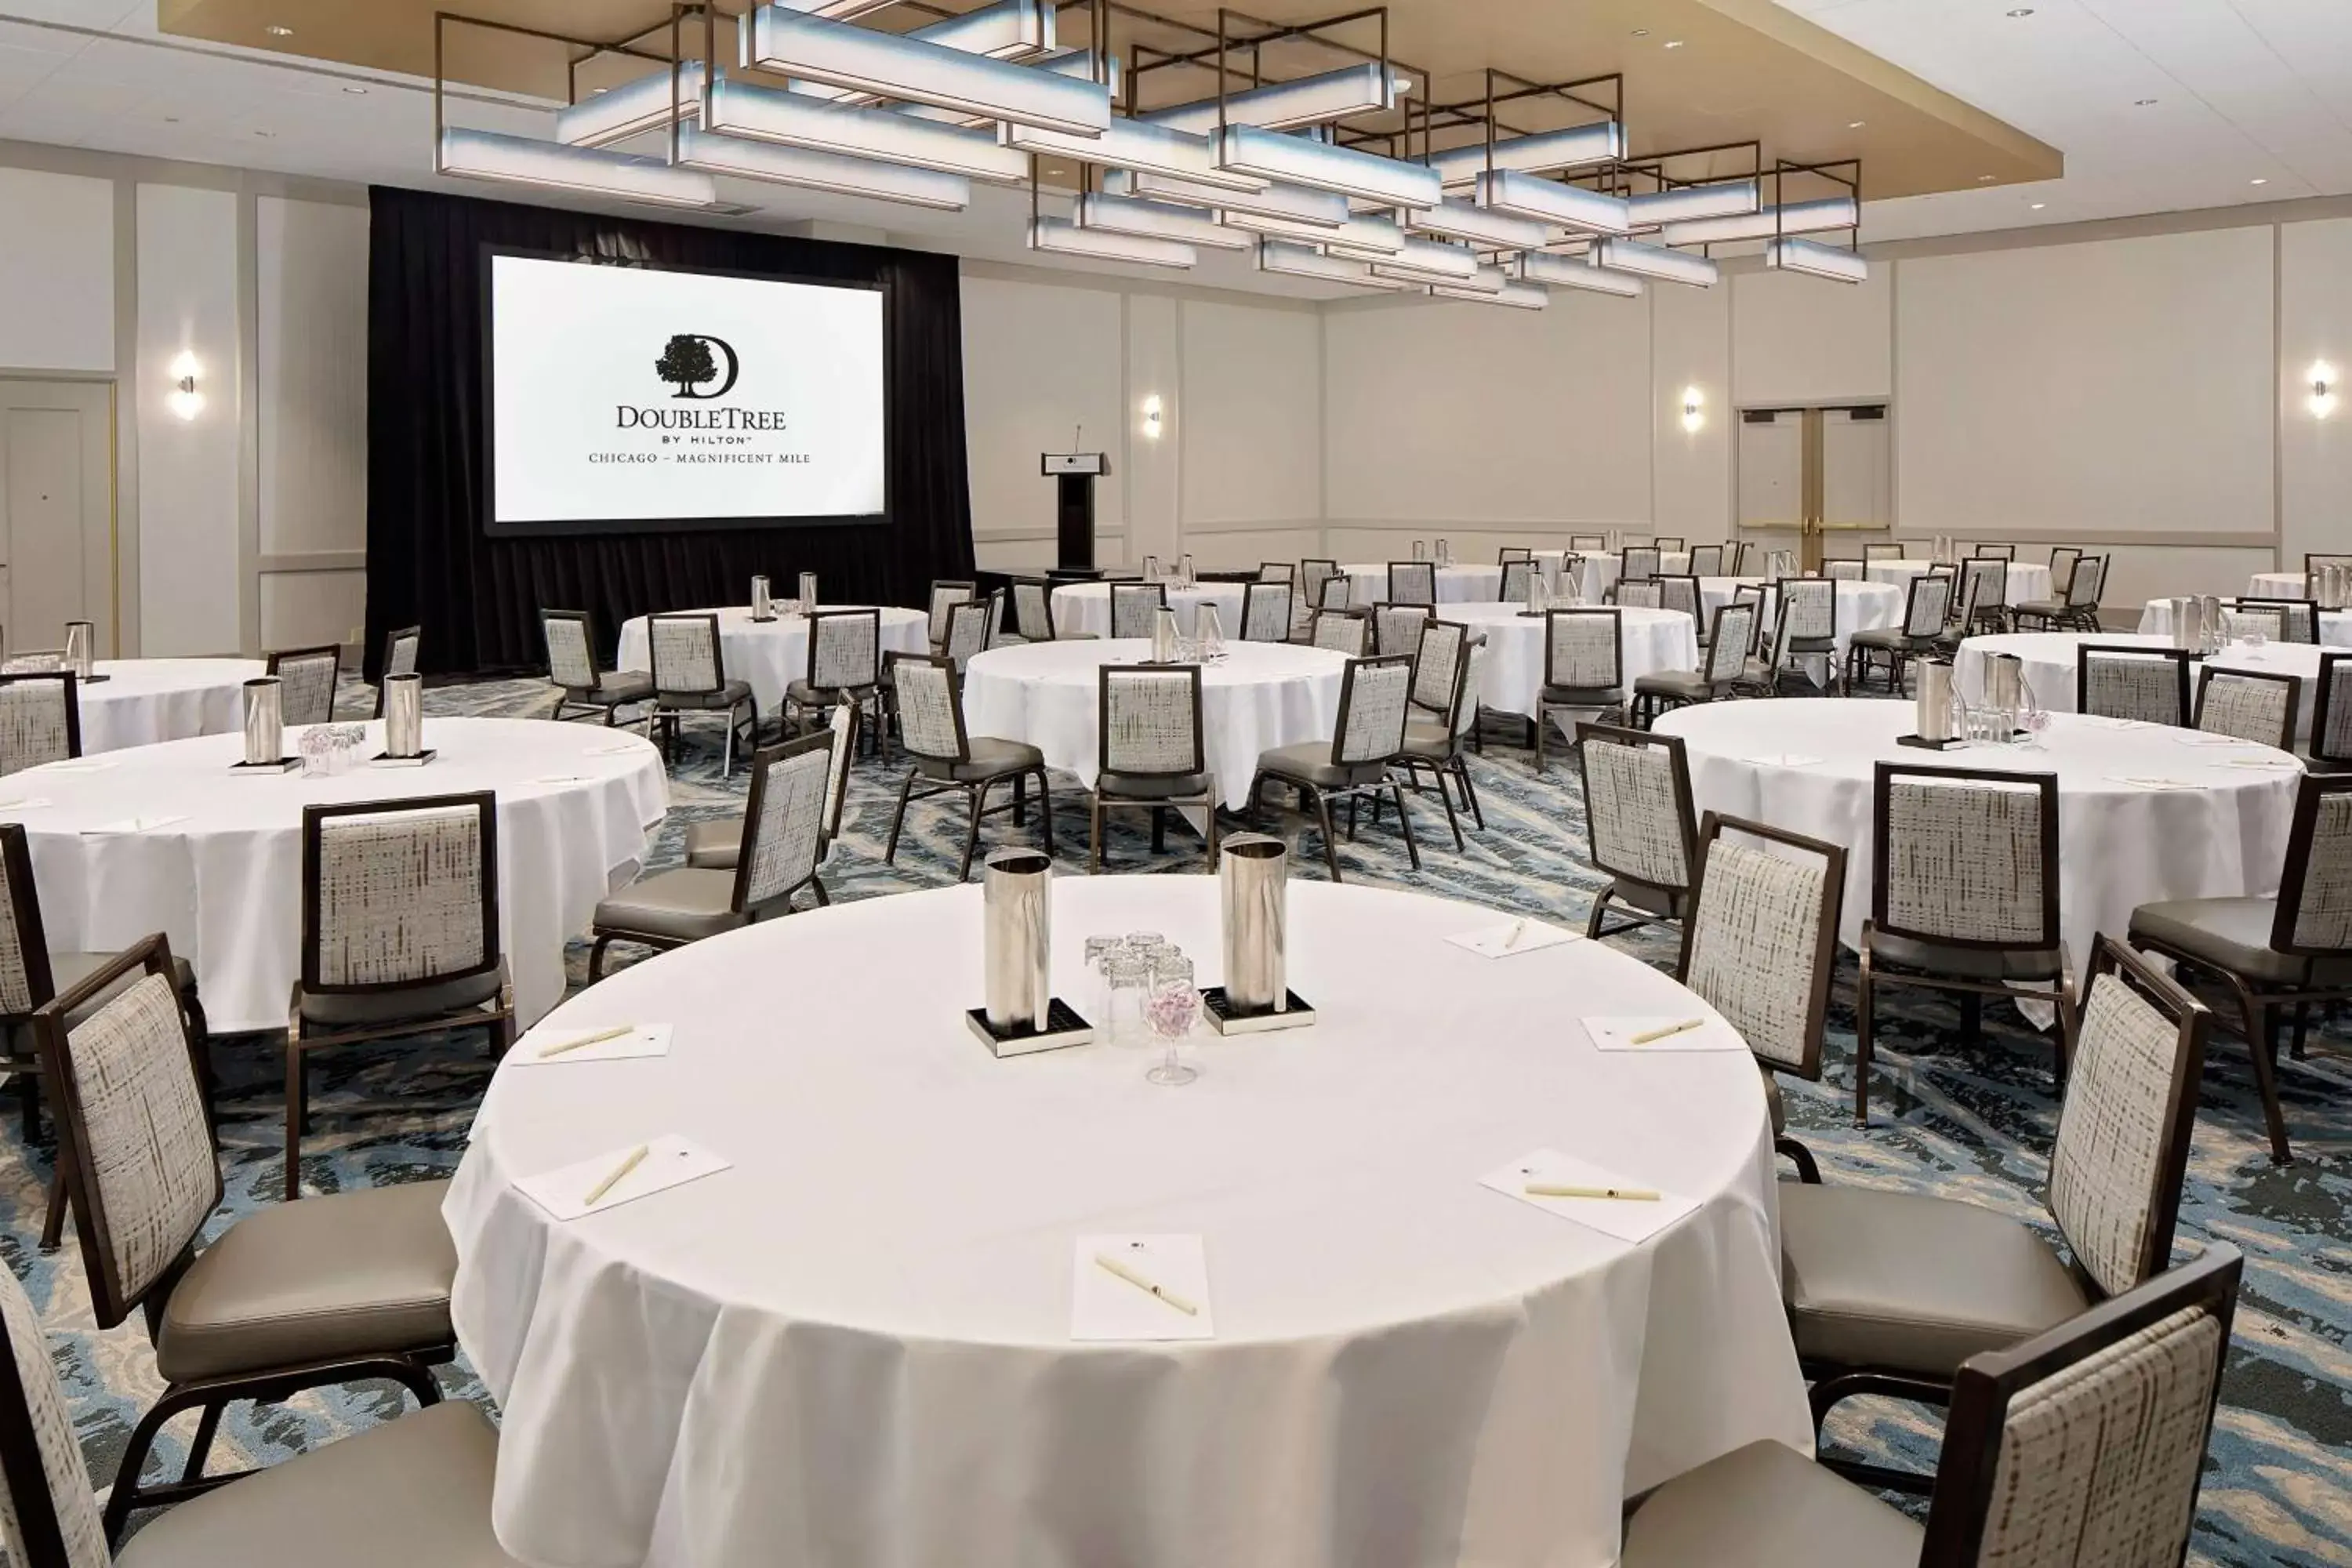 Meeting/conference room, Banquet Facilities in DoubleTree by Hilton Chicago Magnificent Mile